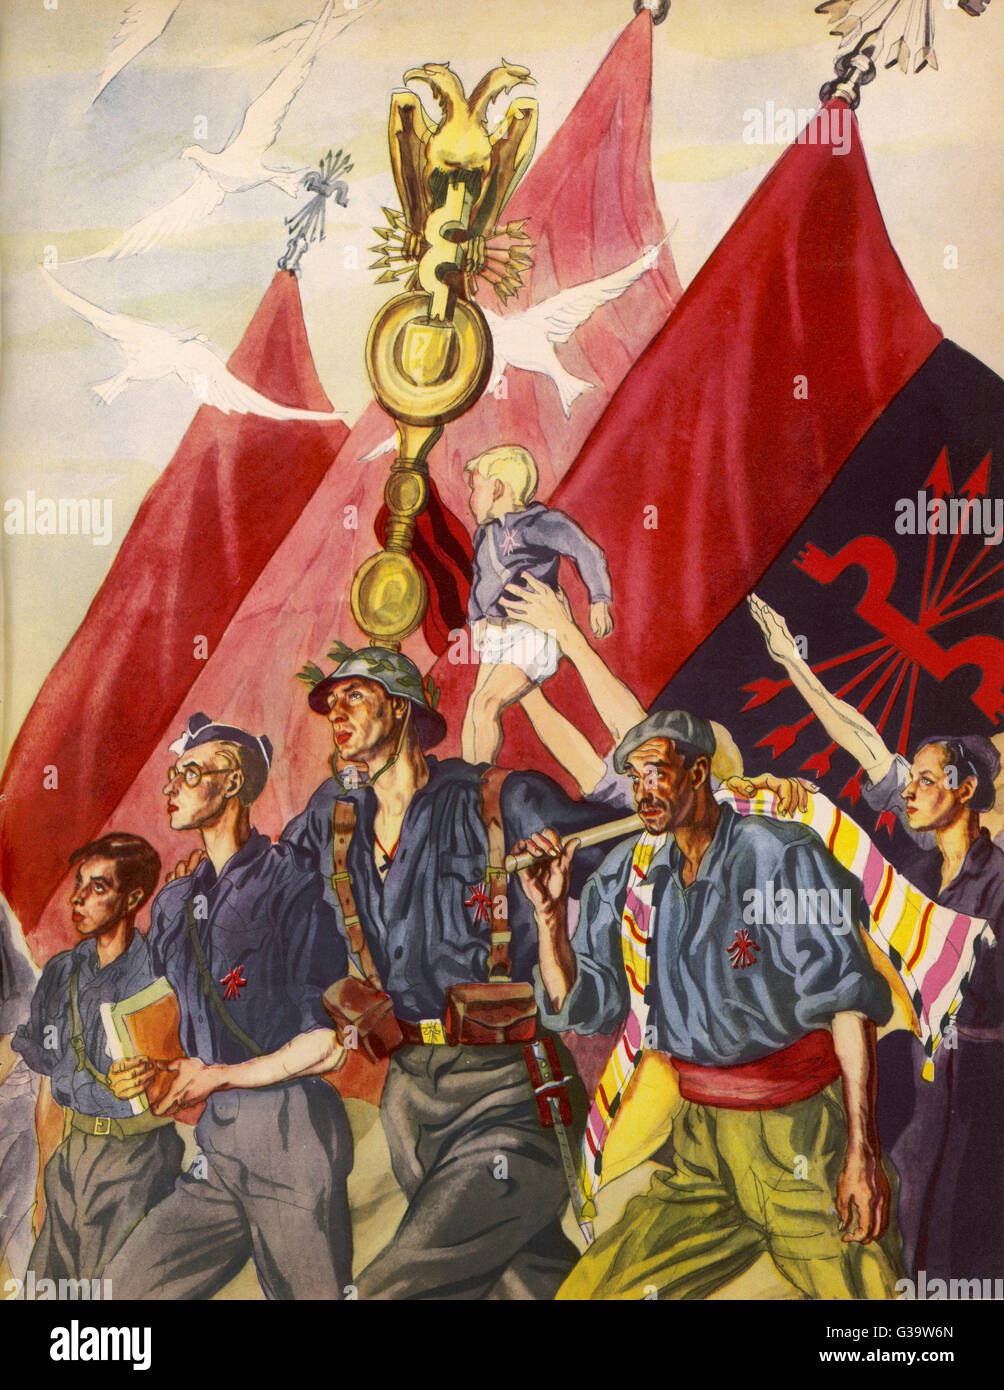 'La Falange' - supporters of  the Falangist (Spanish  fascist) party march forward  in unity      Date: 1937 Stock Photo